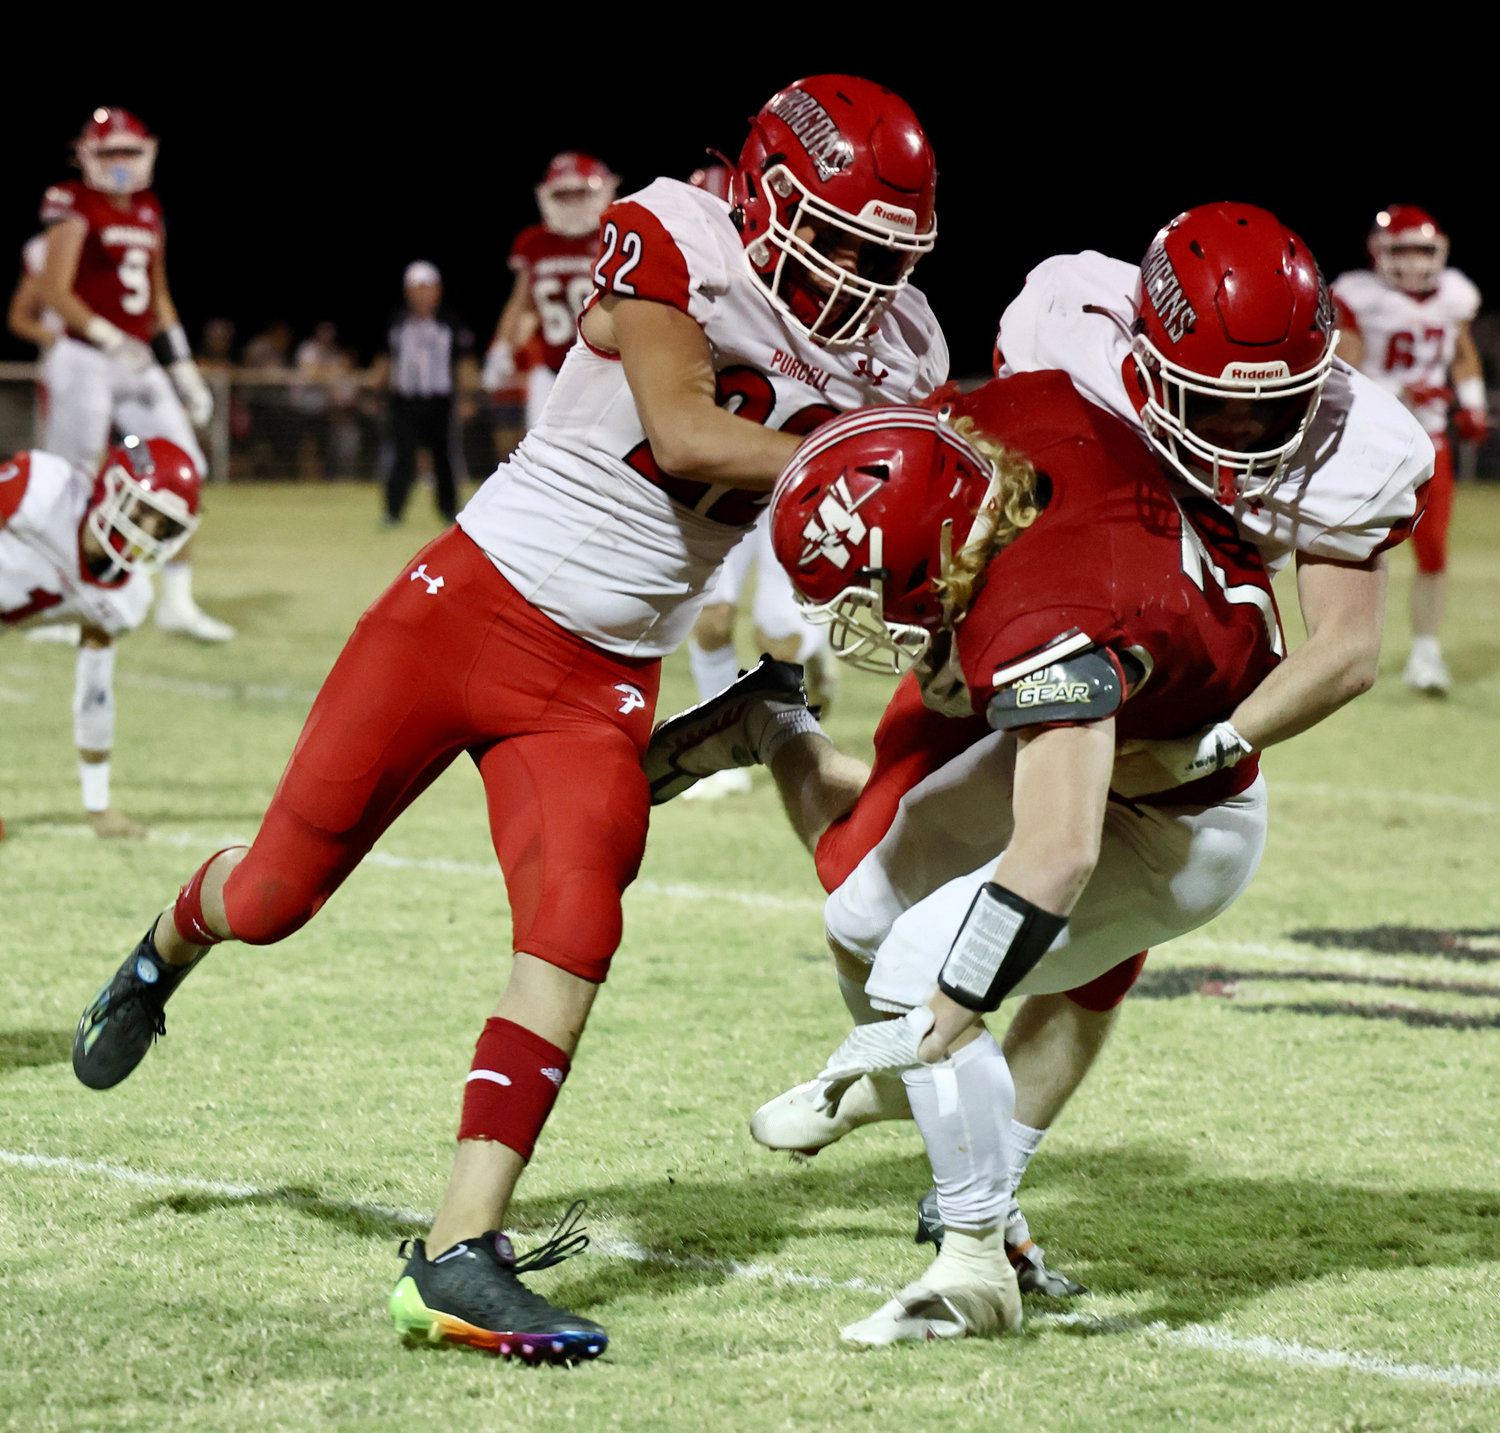 Payson Purcell (22) and Adam Edelman (73) tackle Washington’s Cole Scott. The Dragons host Little Axe Friday night at Conger Field.